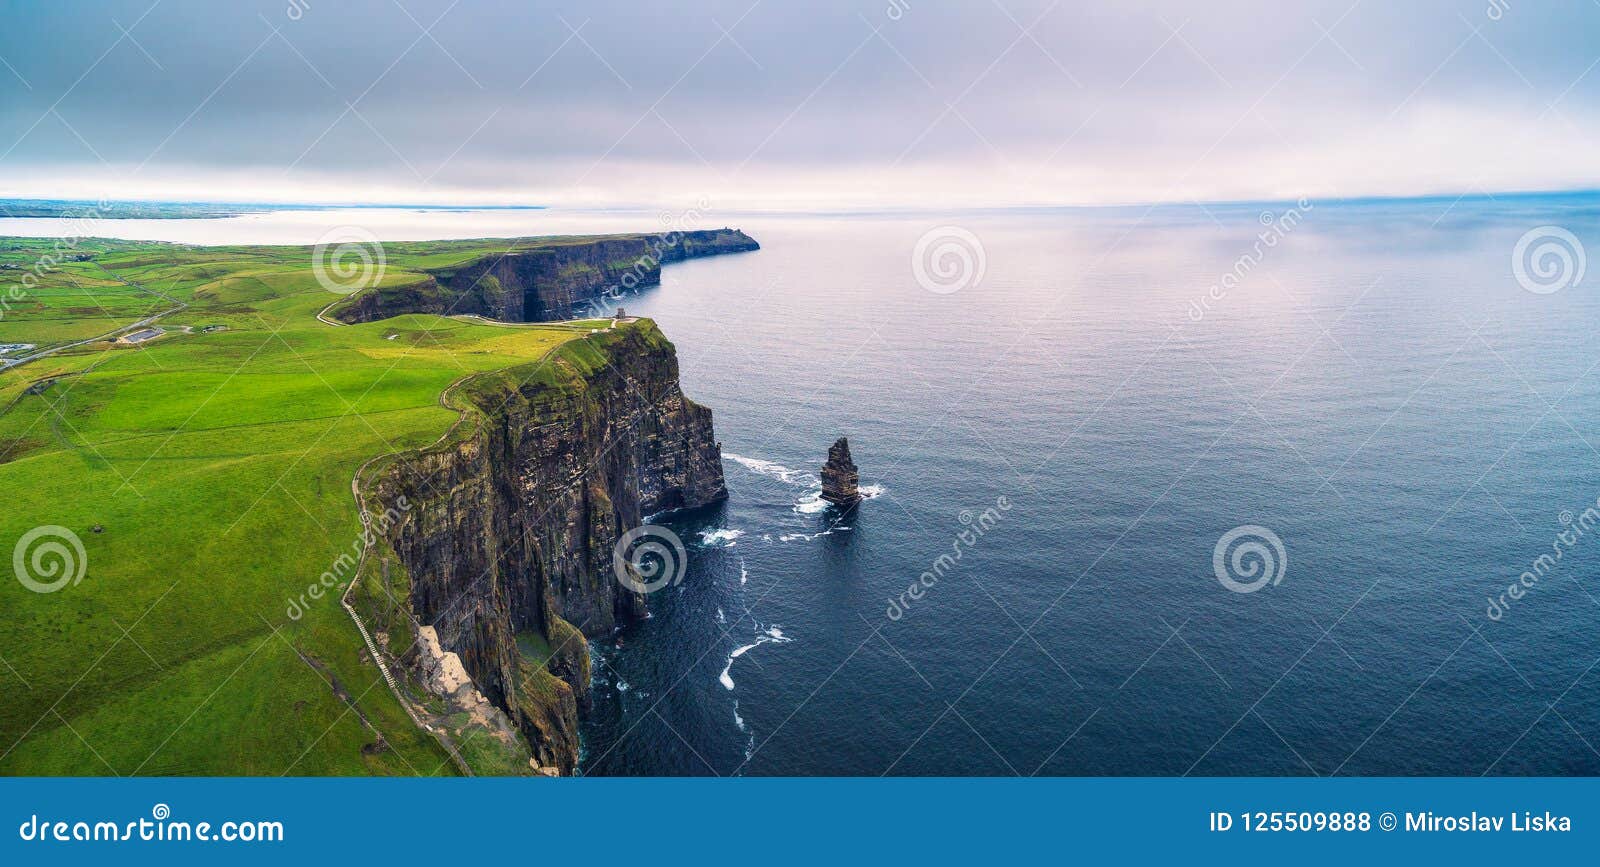 aerial panorama of the scenic cliffs of moher in ireland